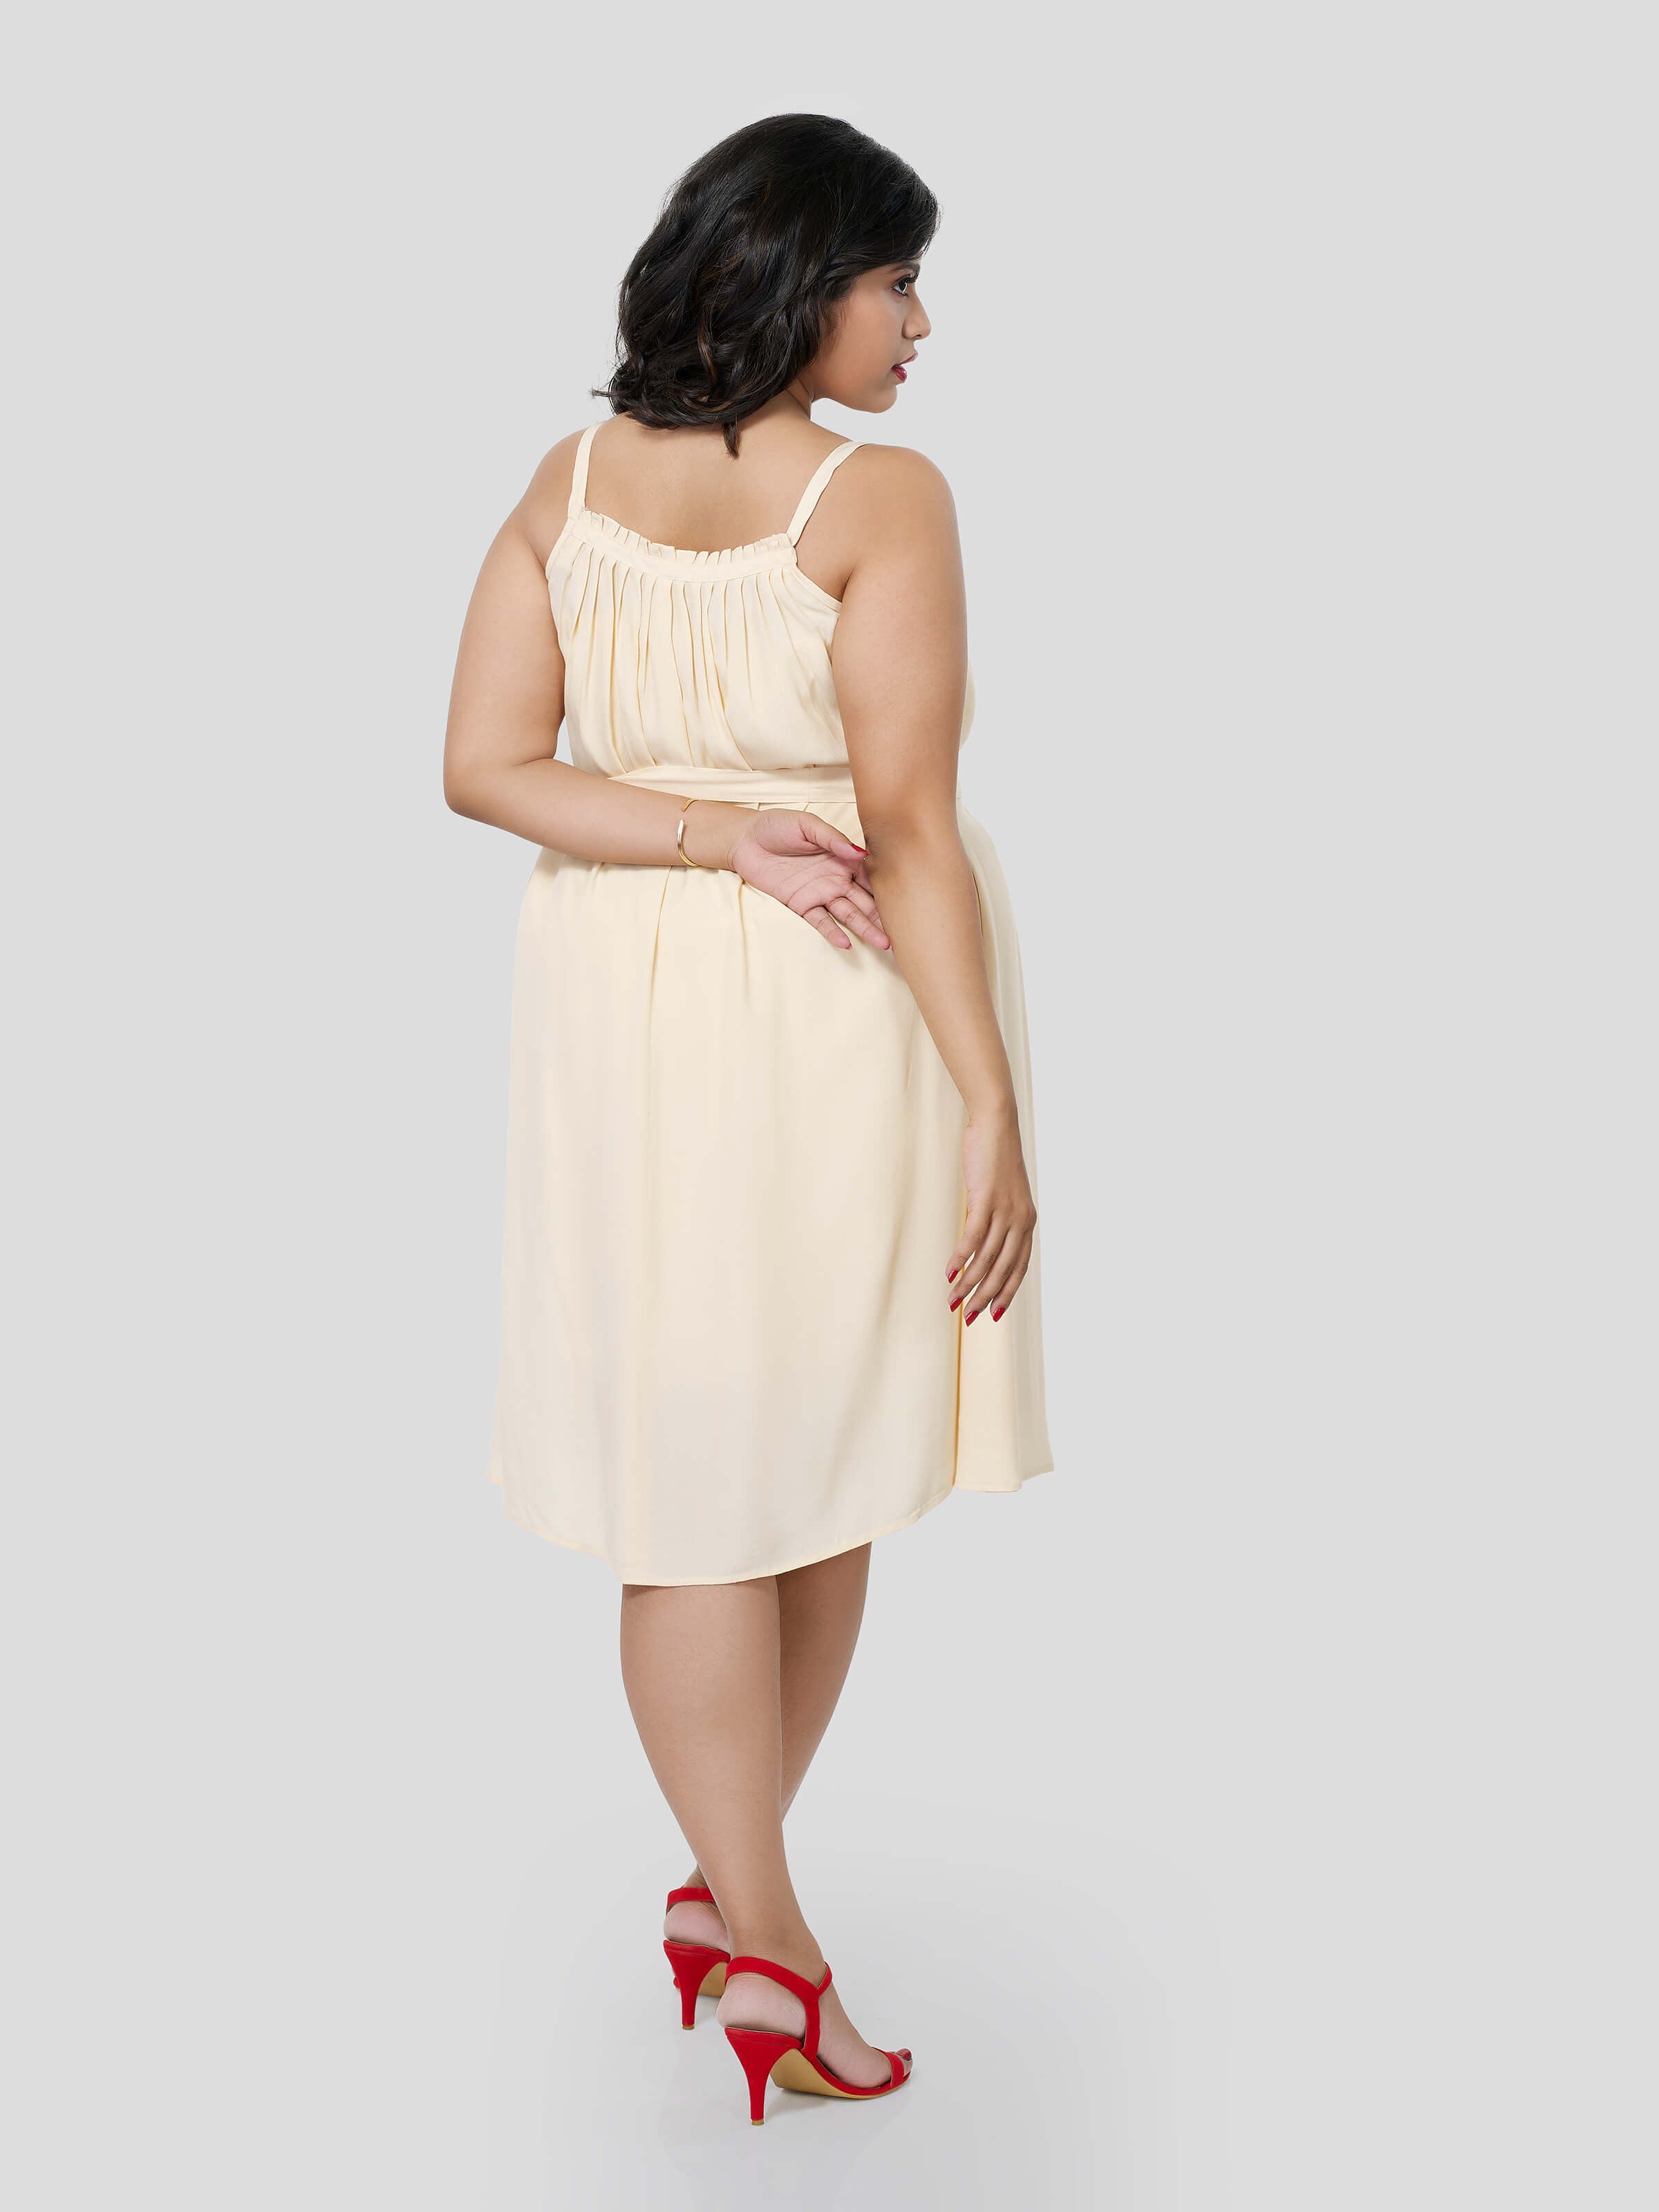 Soft Aggression look in Frill Front Dress - Zest Mélange 